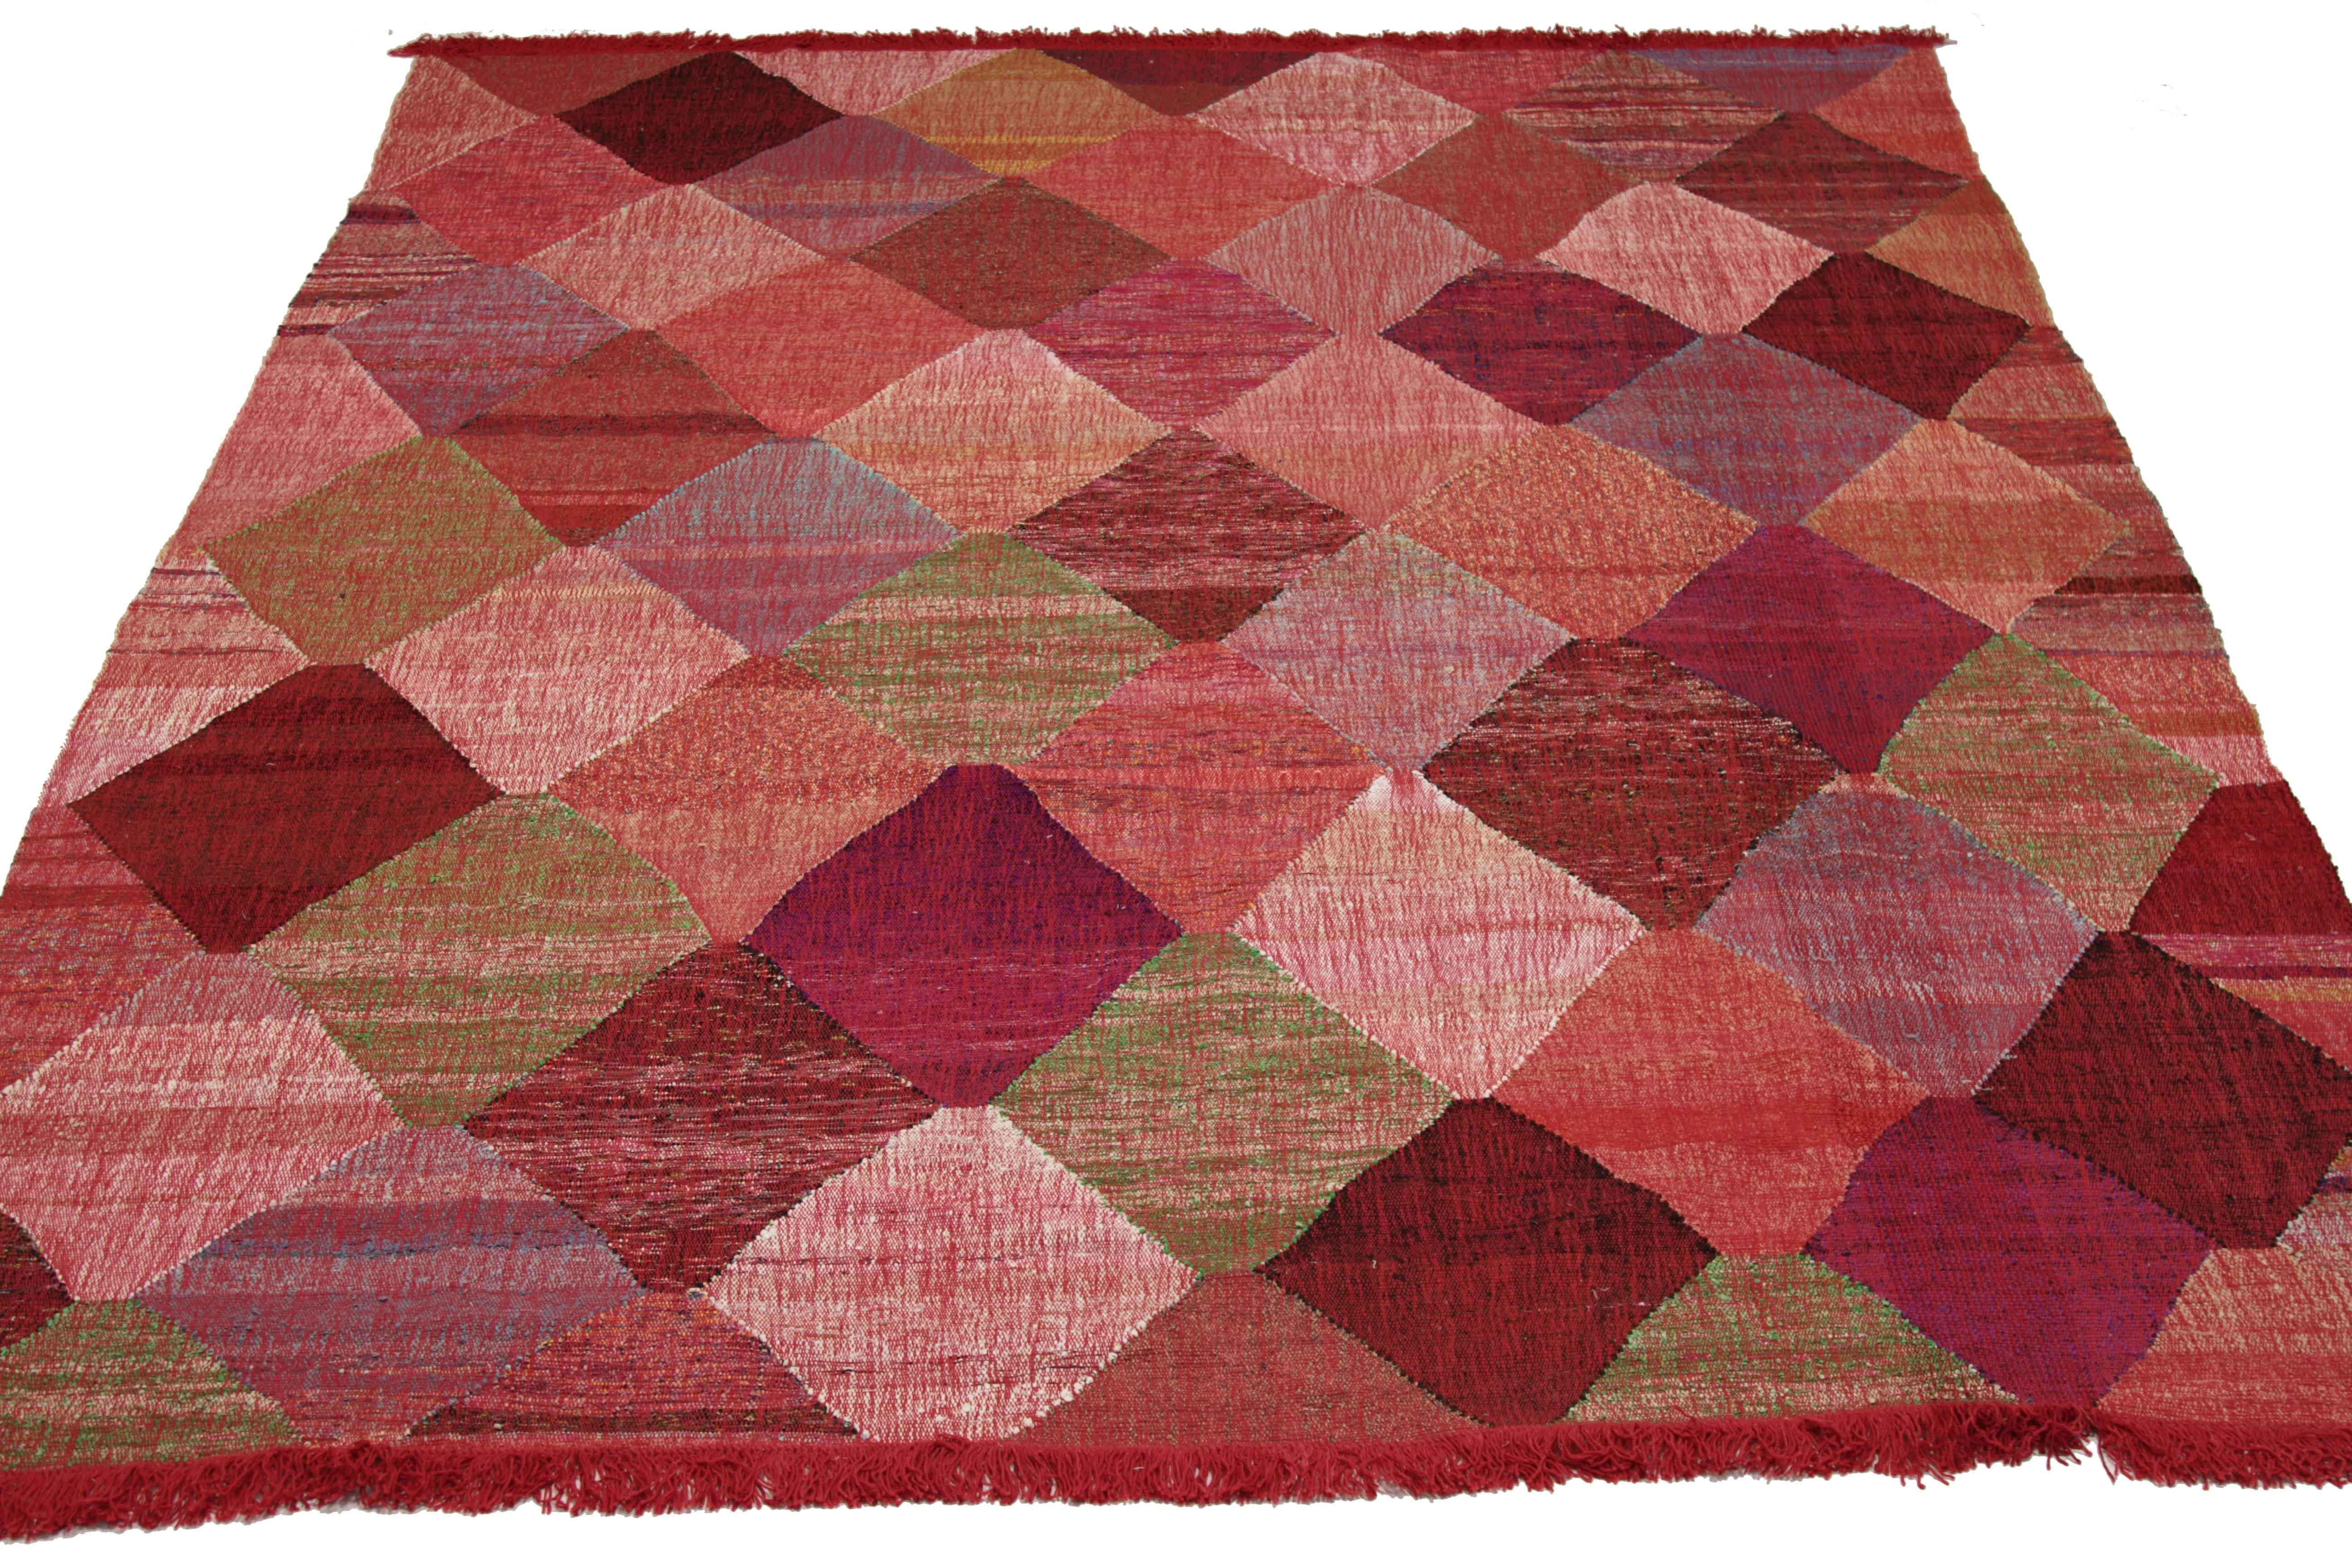 New Turkish rug handwoven from wool taken from antique fine carpets. It’s a traditional Kilim weaving featuring diamond patterns in vibrant colors over an ivory field. It’s a stunning piece to get for contemporary and modern spaces. It has a